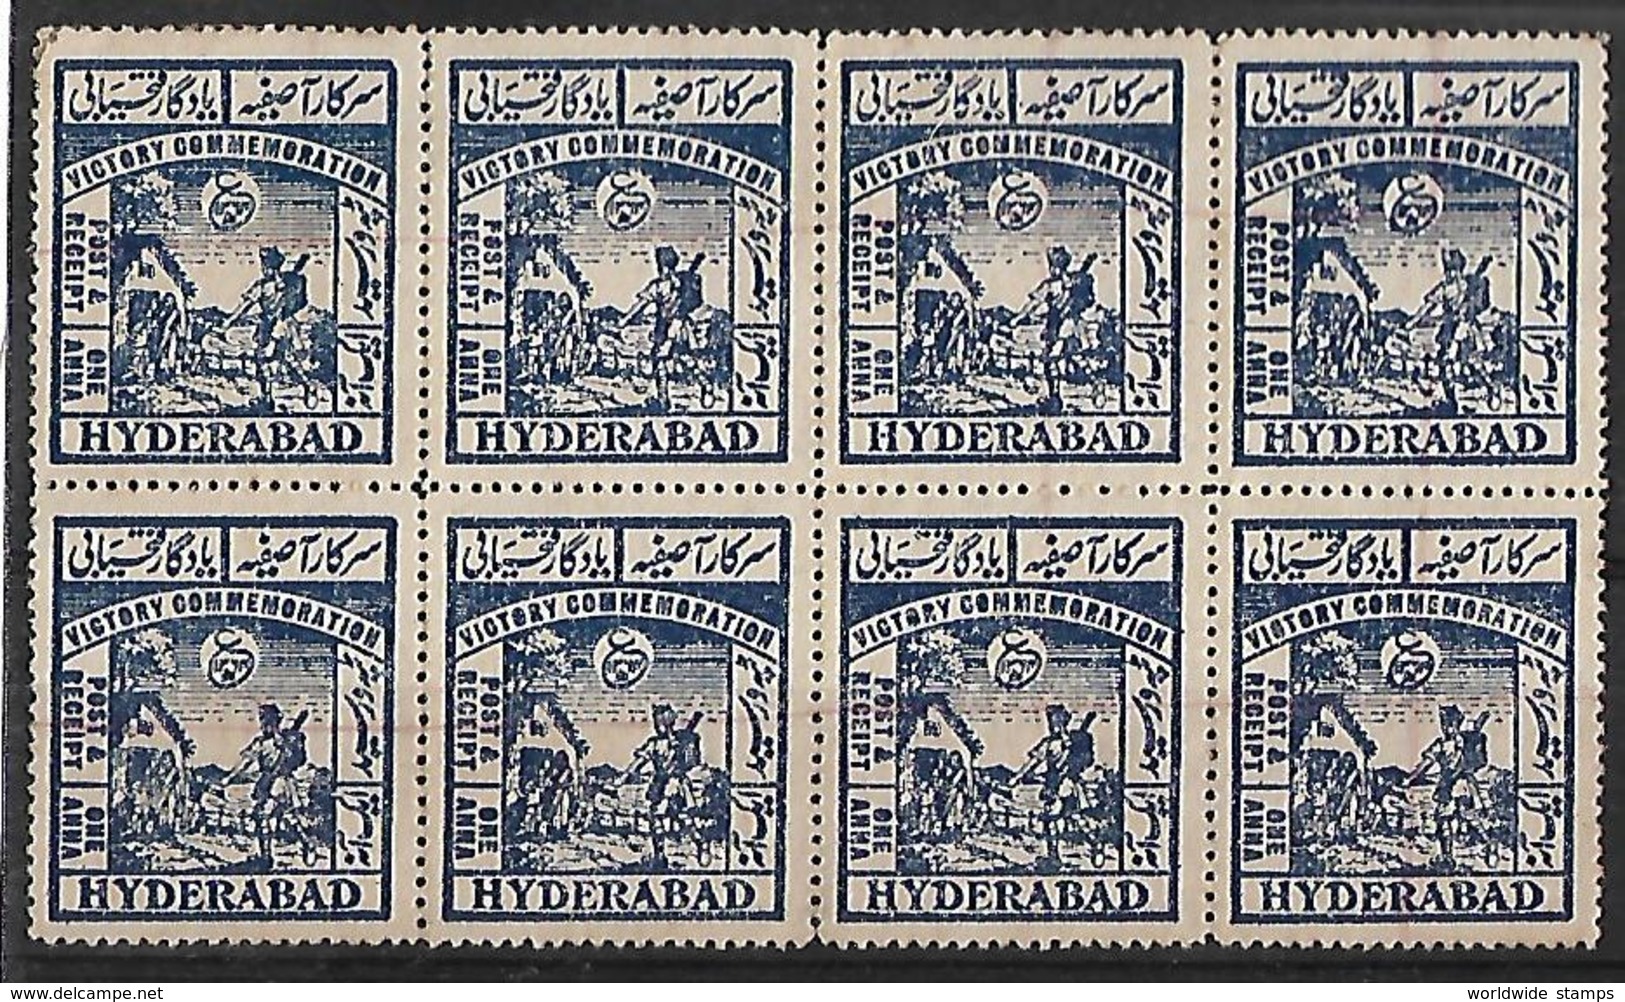 India 1946 1946 VICTORY COMMEMORATION STRIP OF 8  HYDERABAD INDIAN STATE STAMPS MNH - Hyderabad